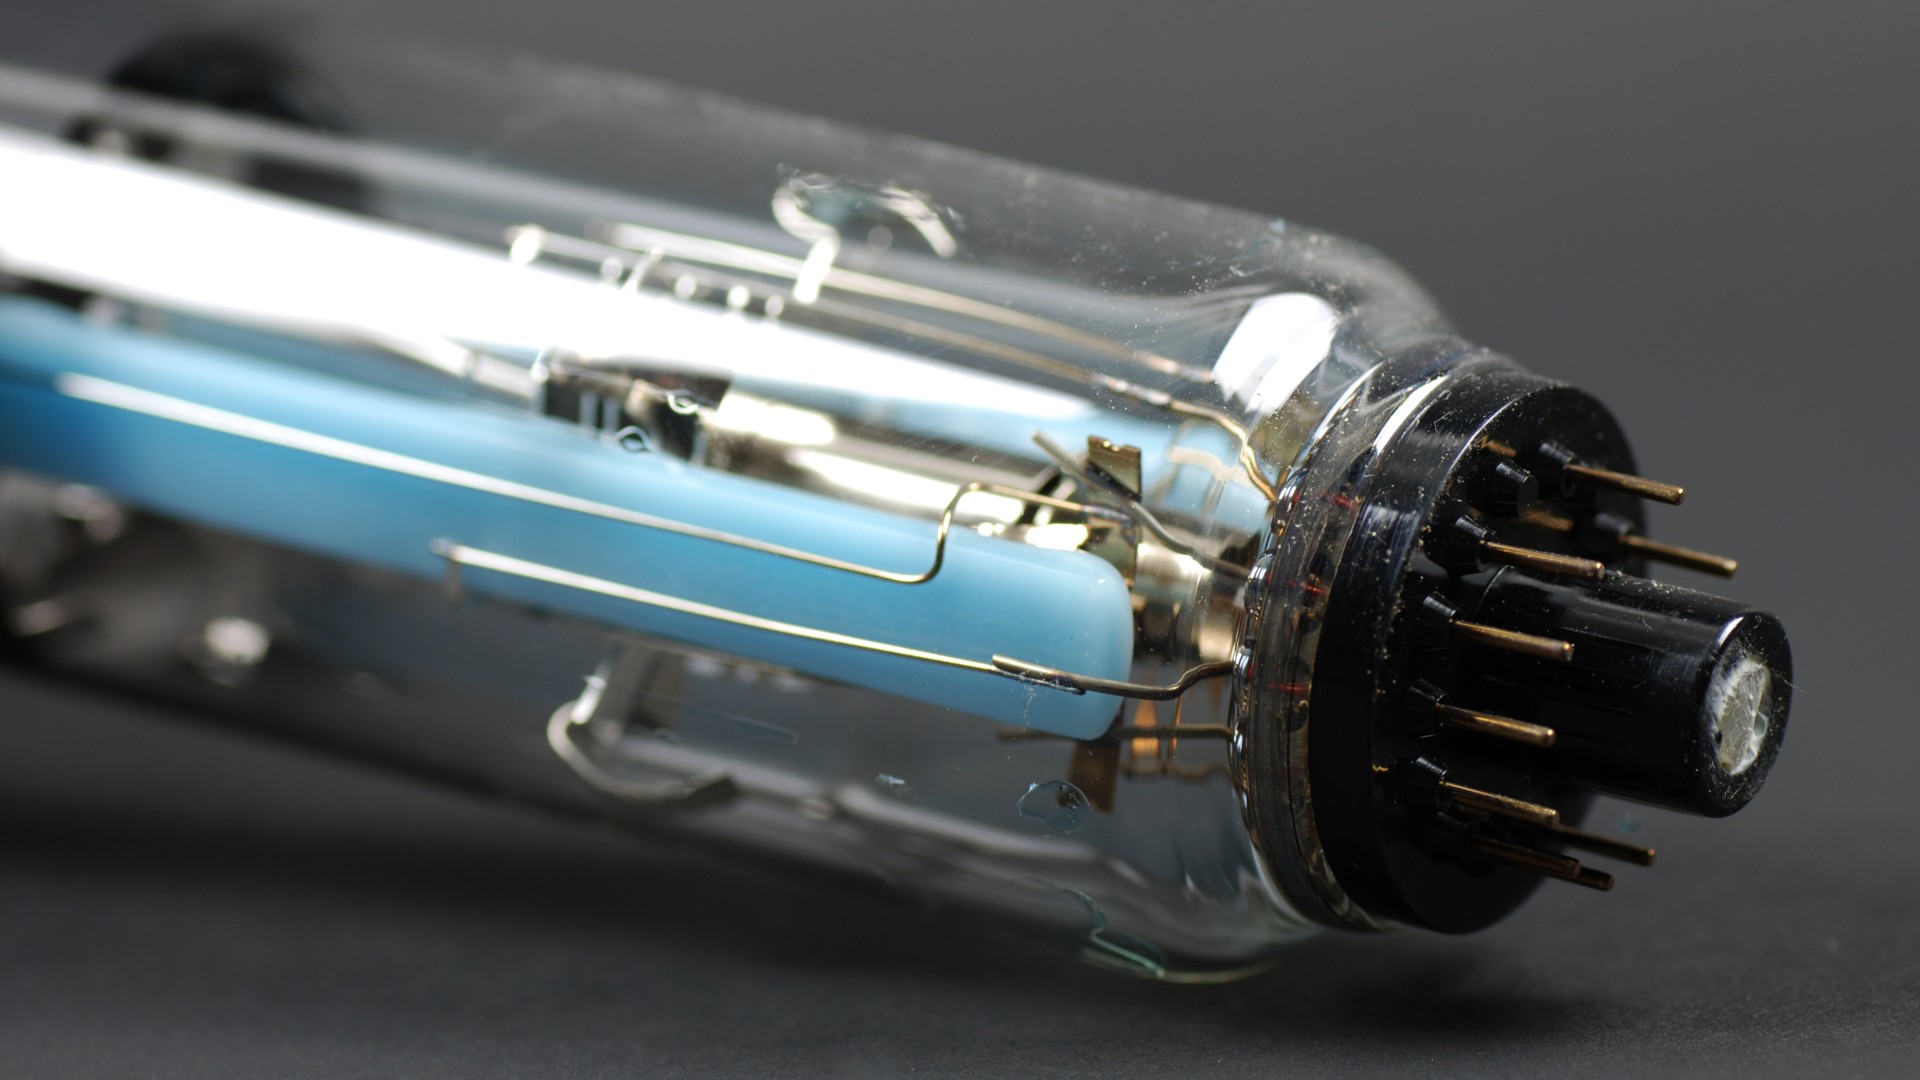 Cathode ray tube used in an old analog oscilloscope in the lab. albln via Getty Images